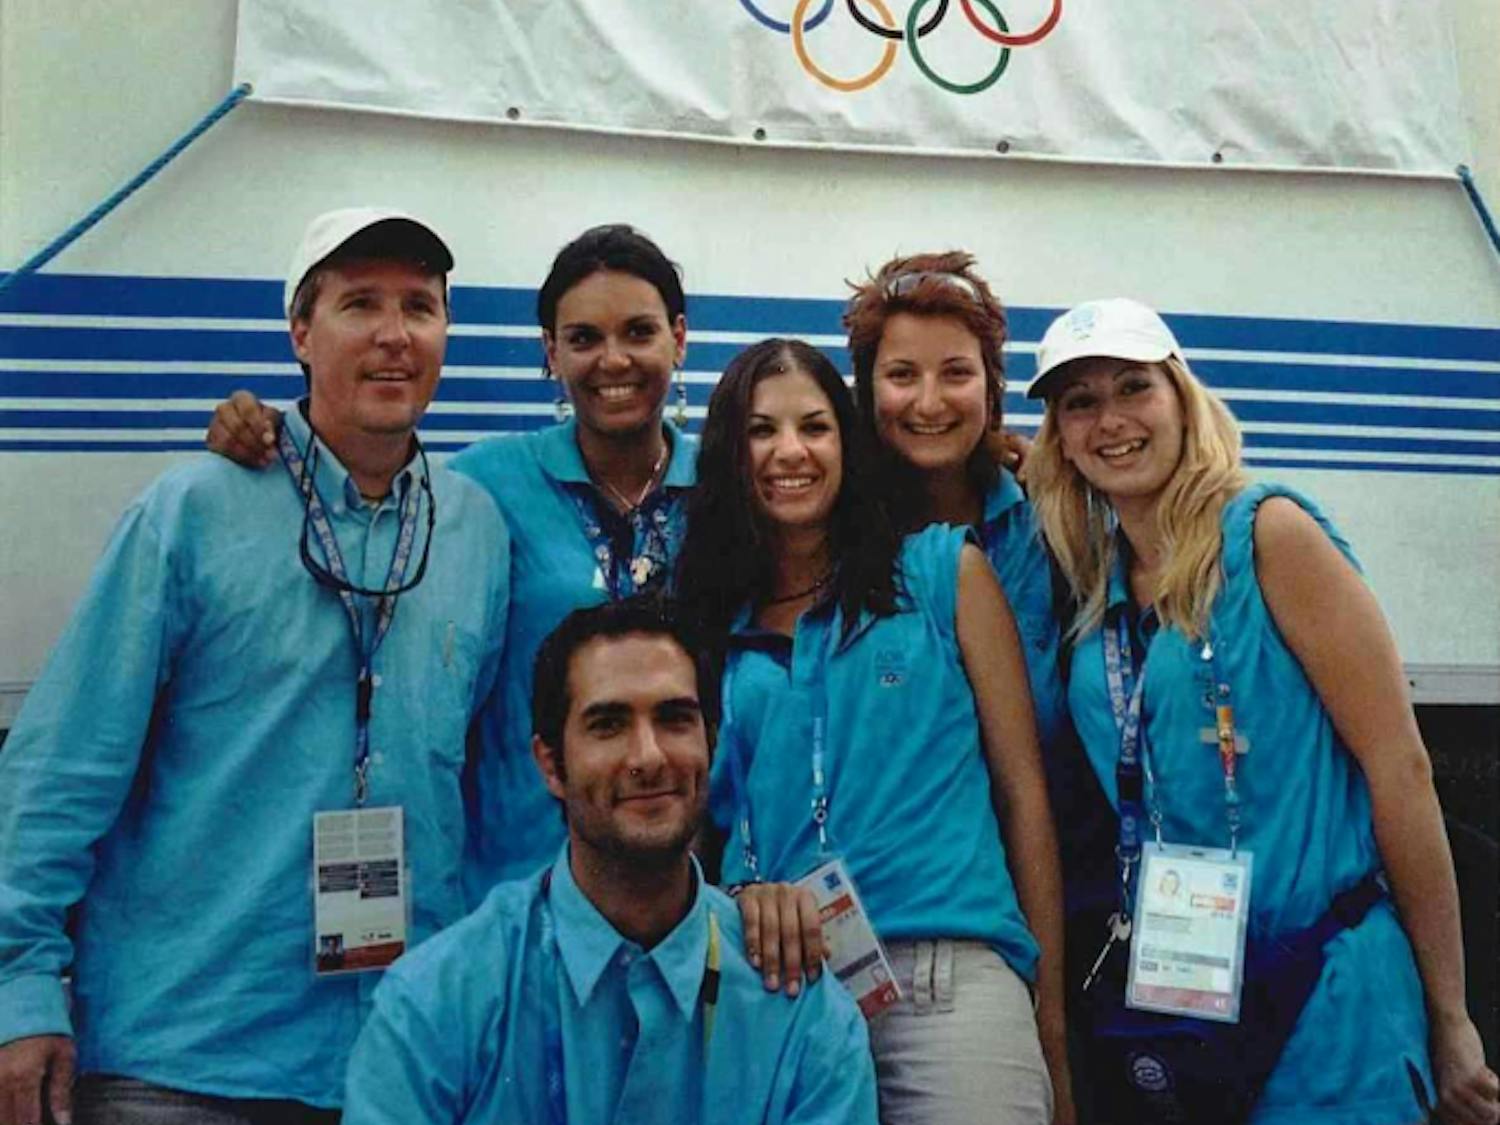 Ric Smith (far left) at the 2004 Olympic Games in Athens, Greece. 